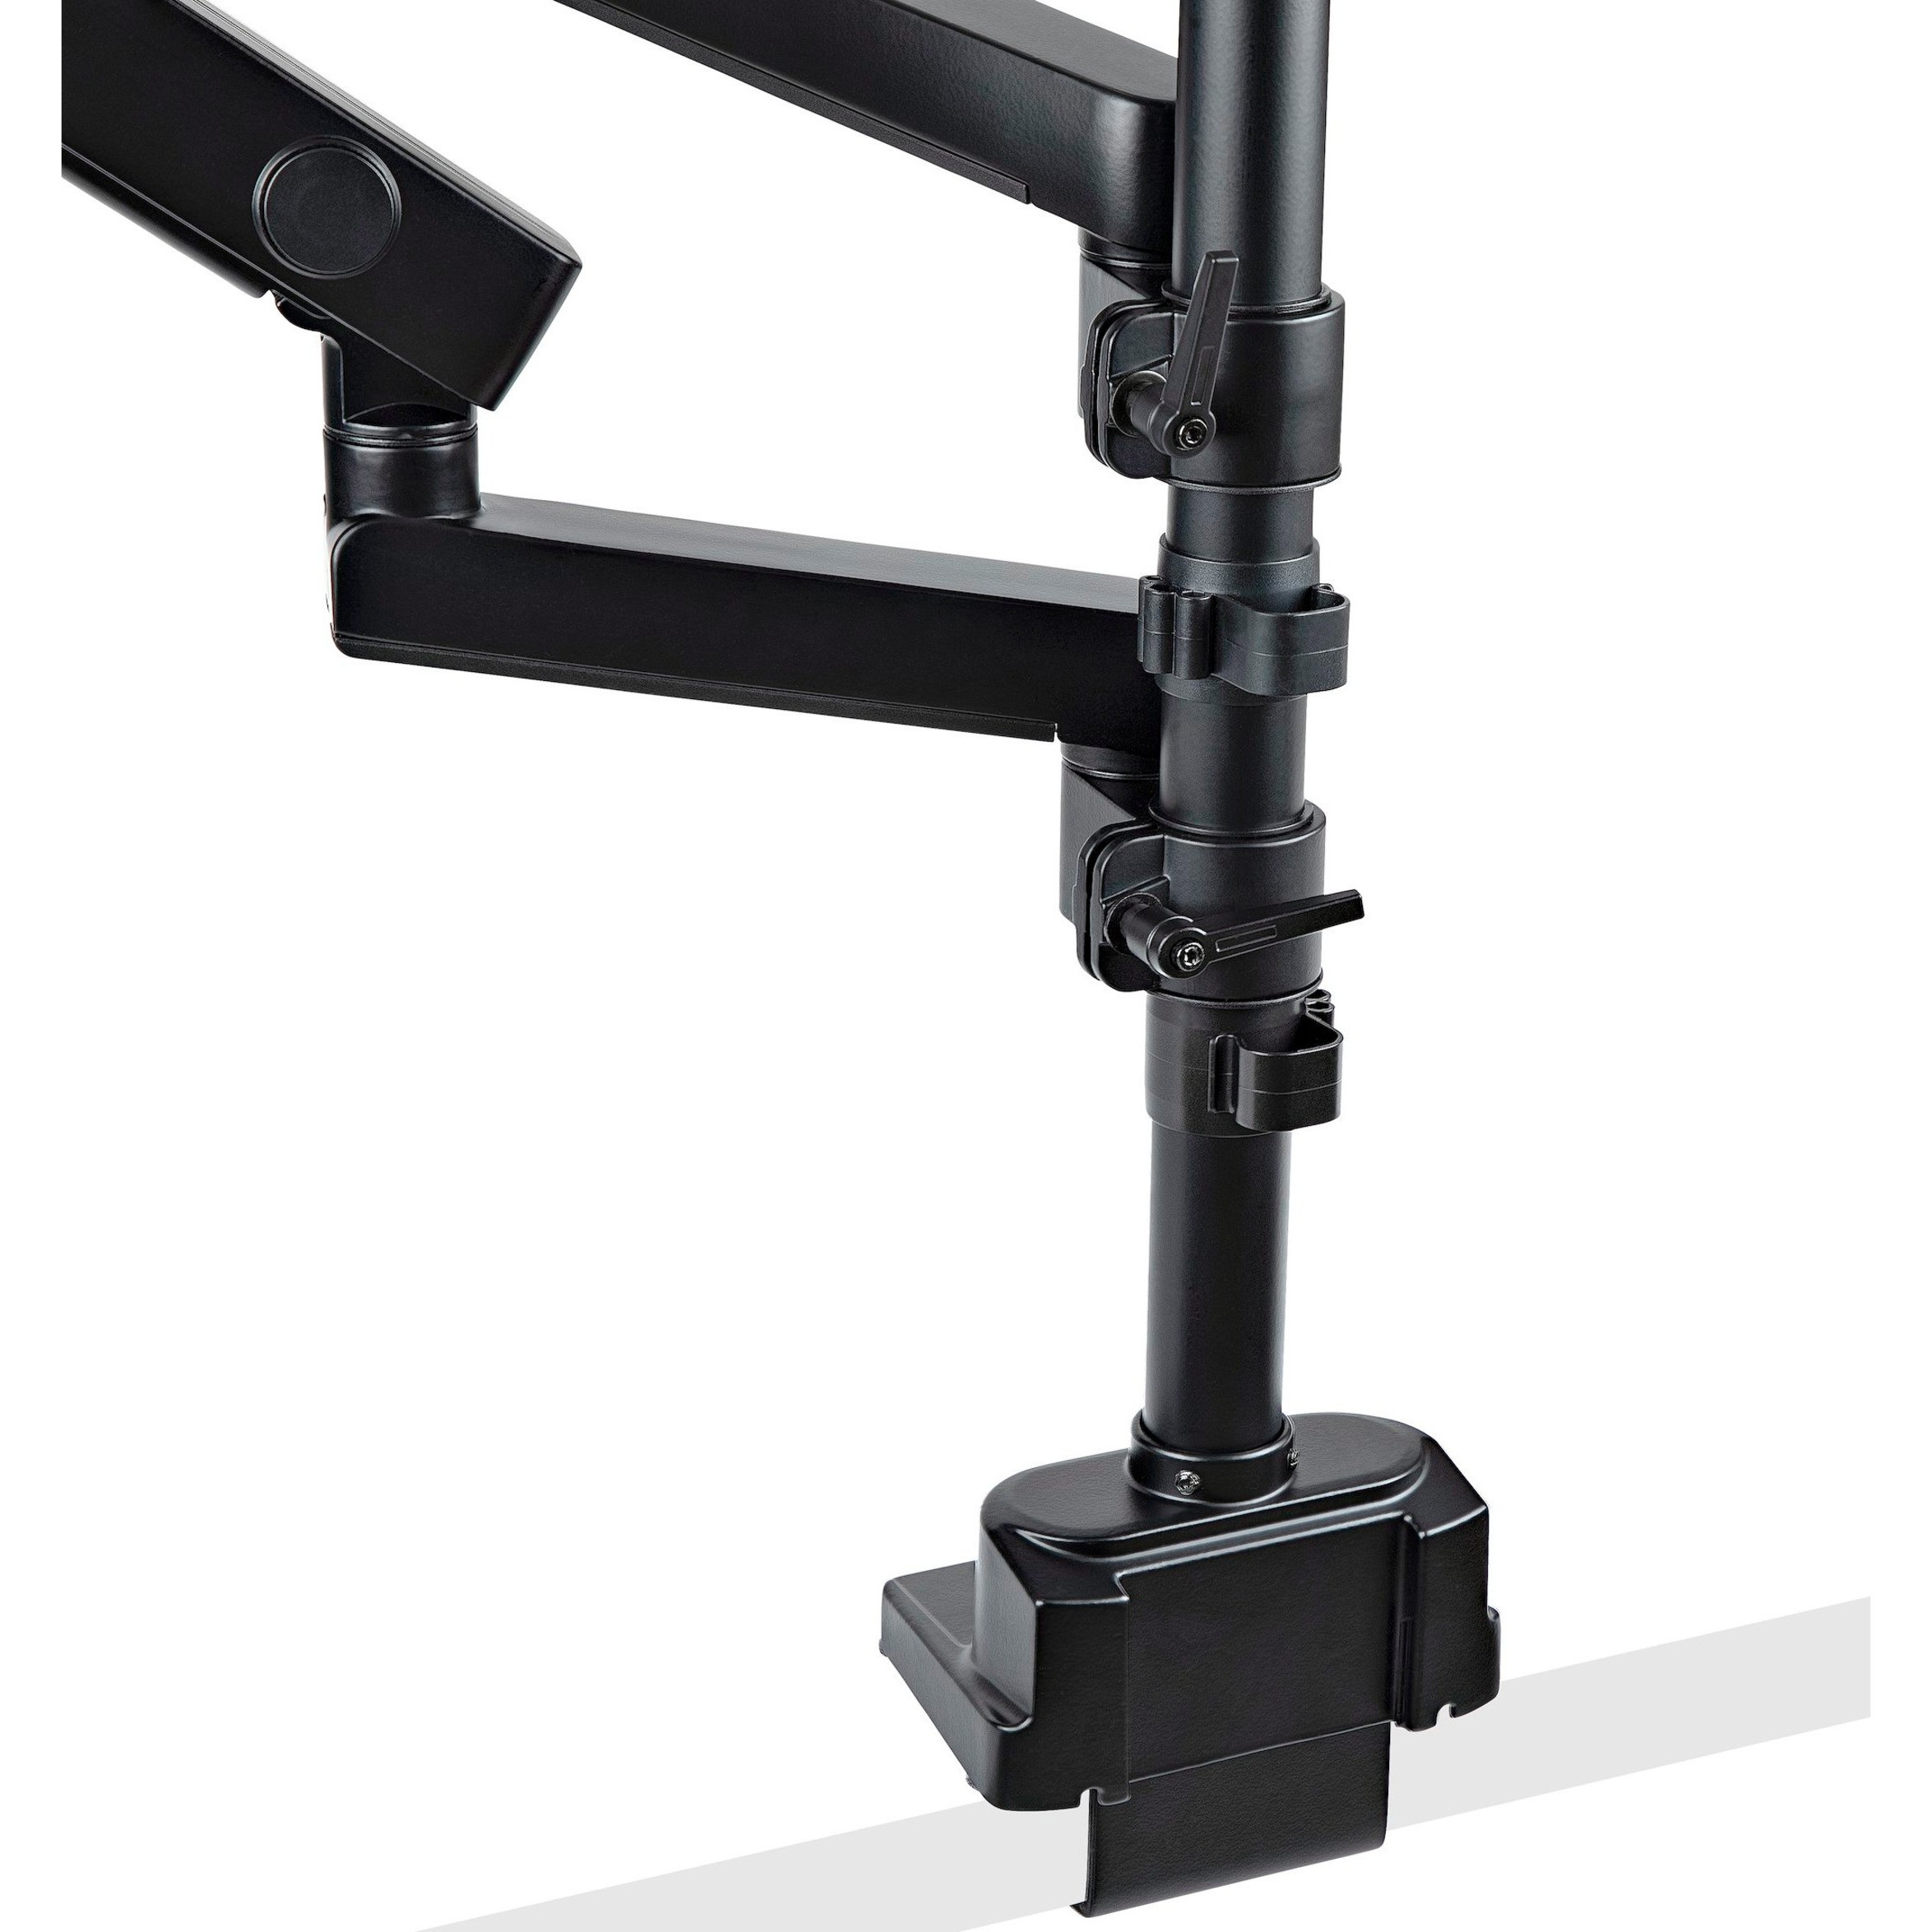 StarTech.com Desk Mount Dual Monitor Arm, Height Adjustable Full Motion Monitor